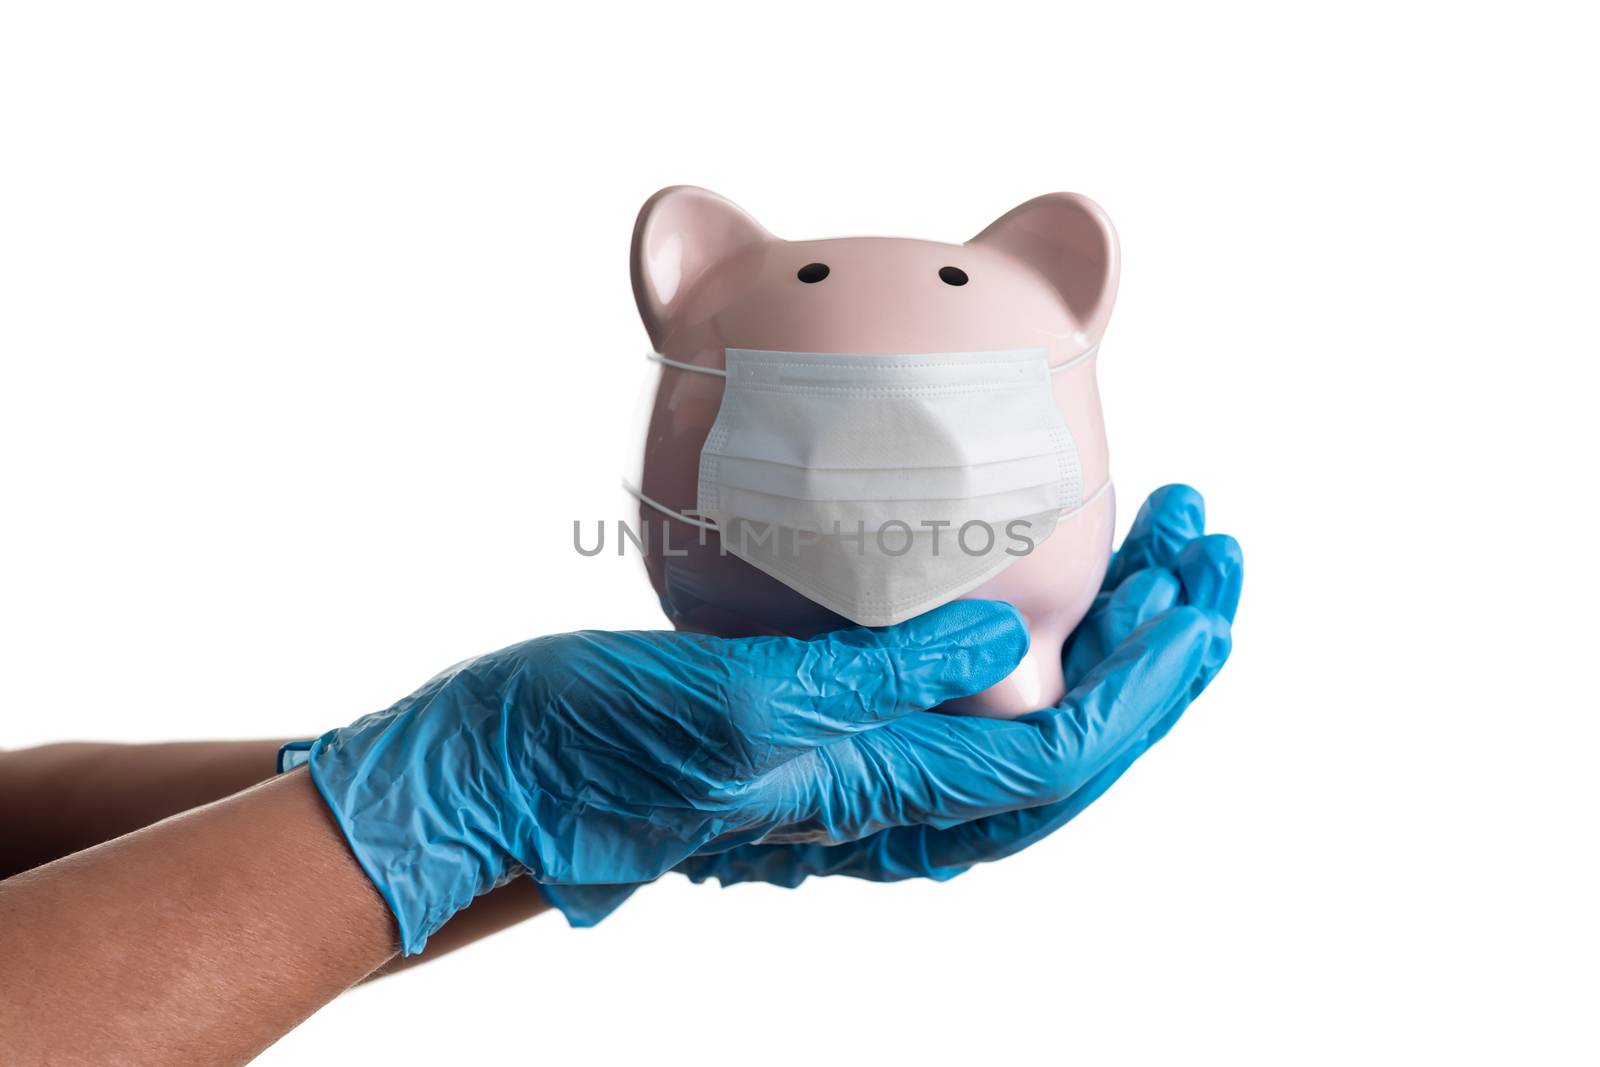 Doctor or Nurse Wearing Surgical Gloves Holding Piggy Bank Wearing Medical Face Mask Isolated on White.